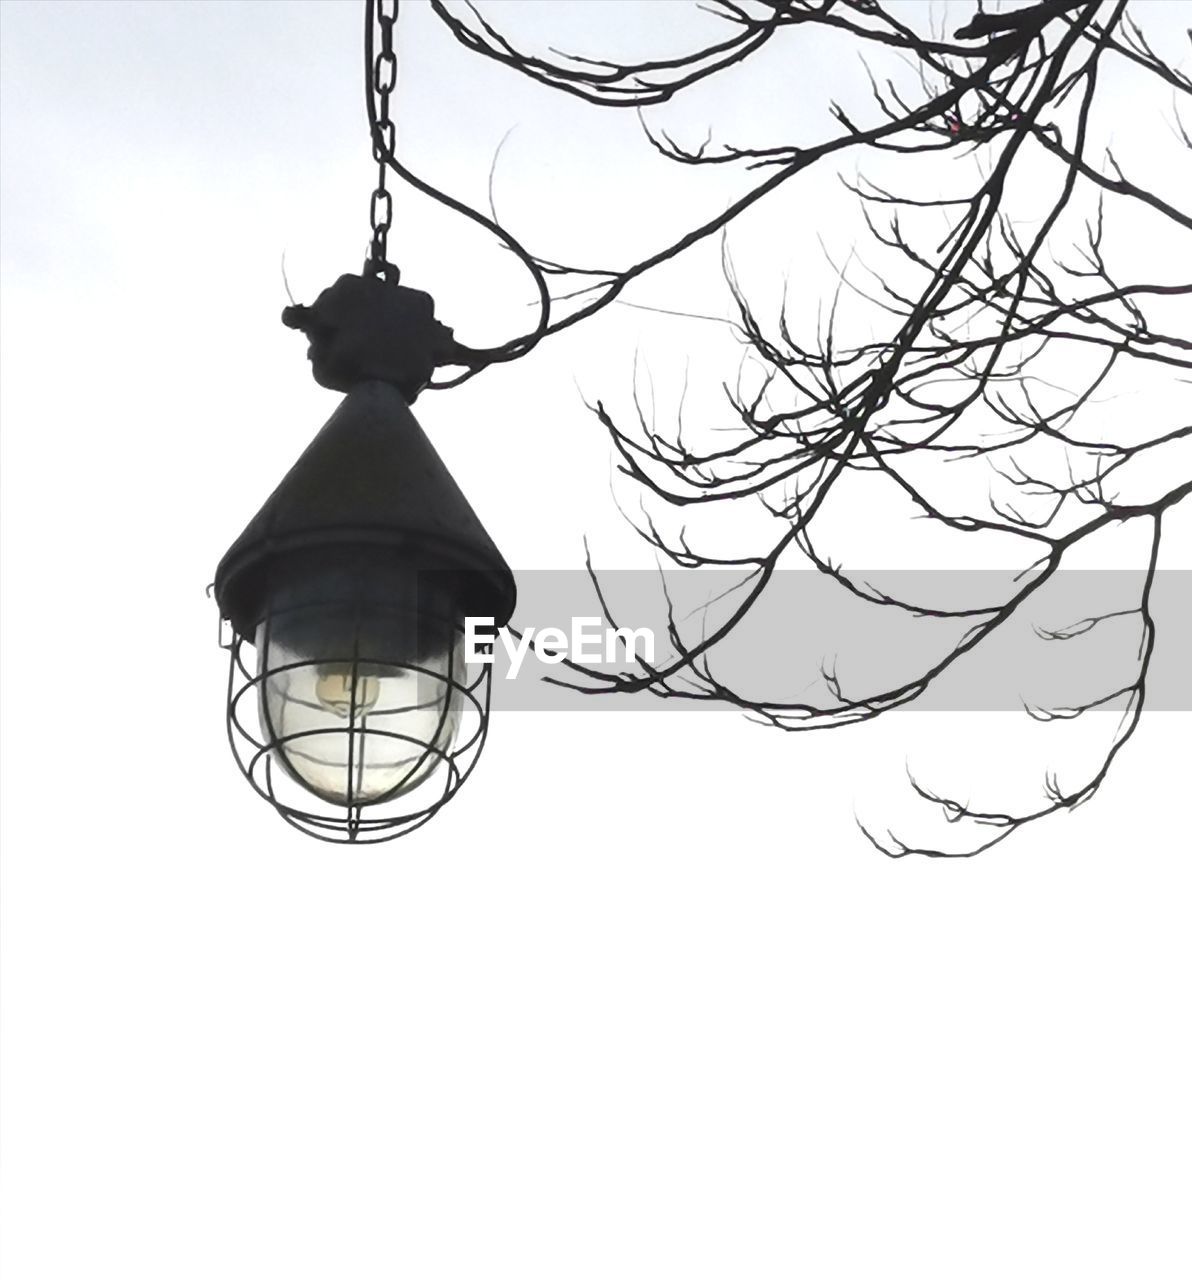 LOW ANGLE VIEW OF LIGHT BULB HANGING FROM BRANCH